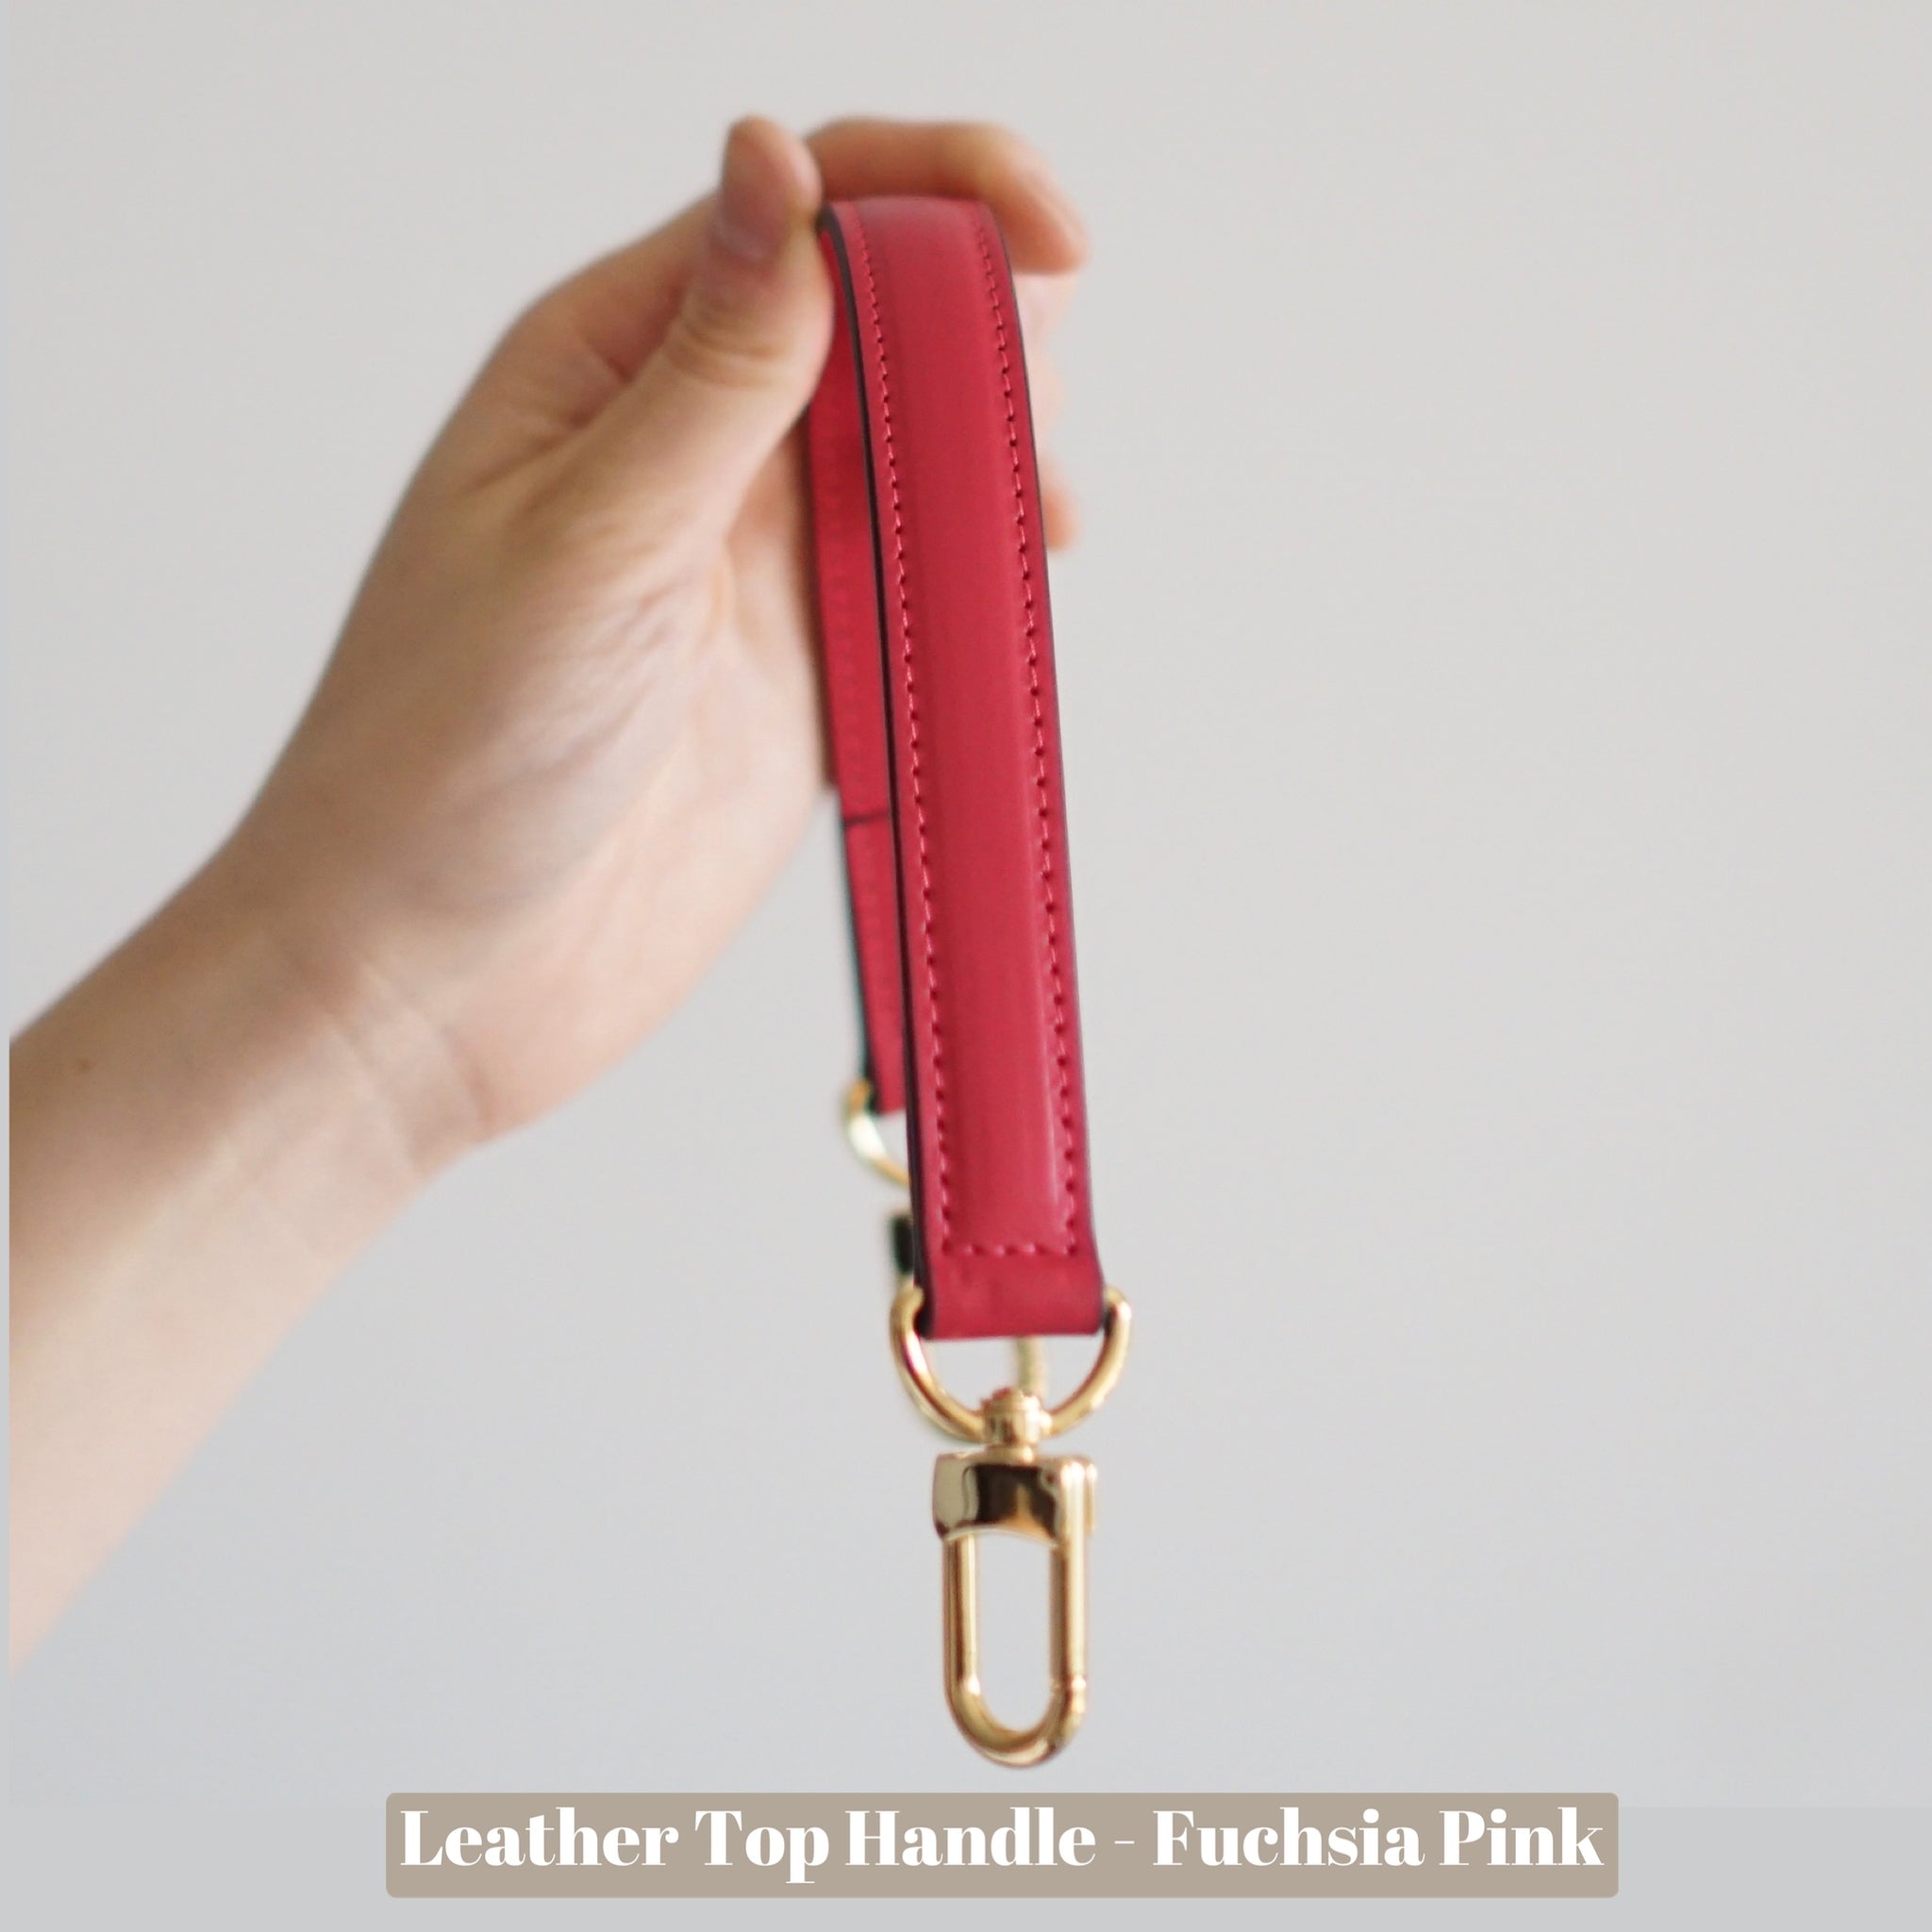 Leather Replacement Top Handle in Cherry Red for Designer Bags and LV  NeoNoe ( ¾” Wide - 11.4” long)